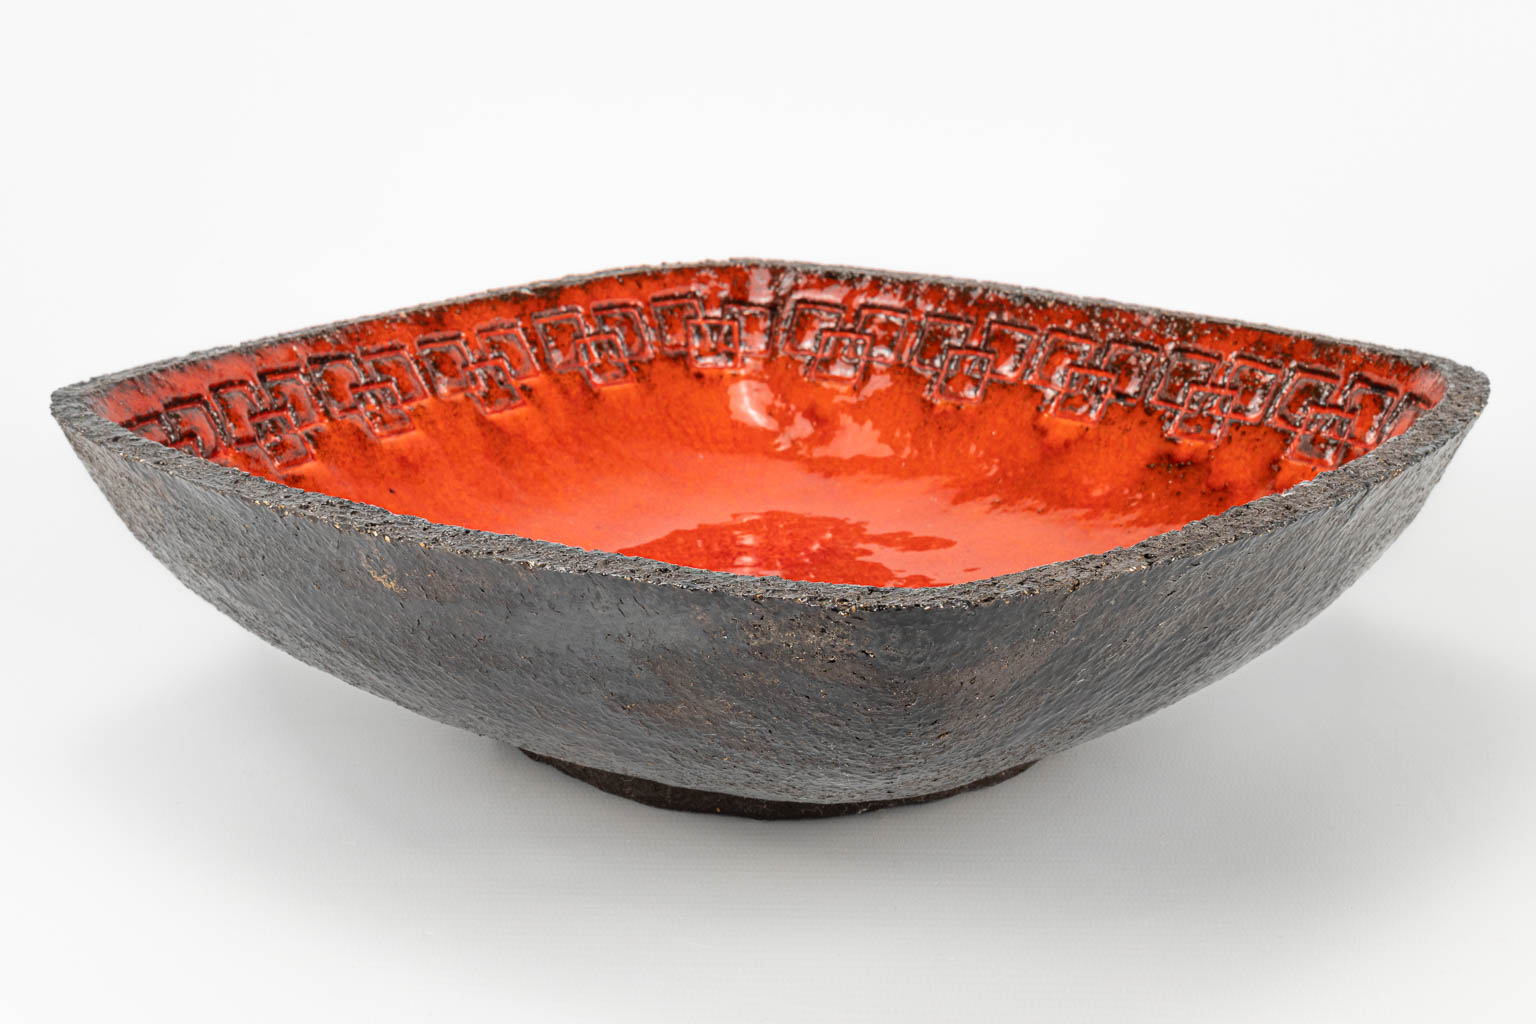 Jan NOLF (1931-1999) A collection of 2 bowls with red glaze of which one is marked. 